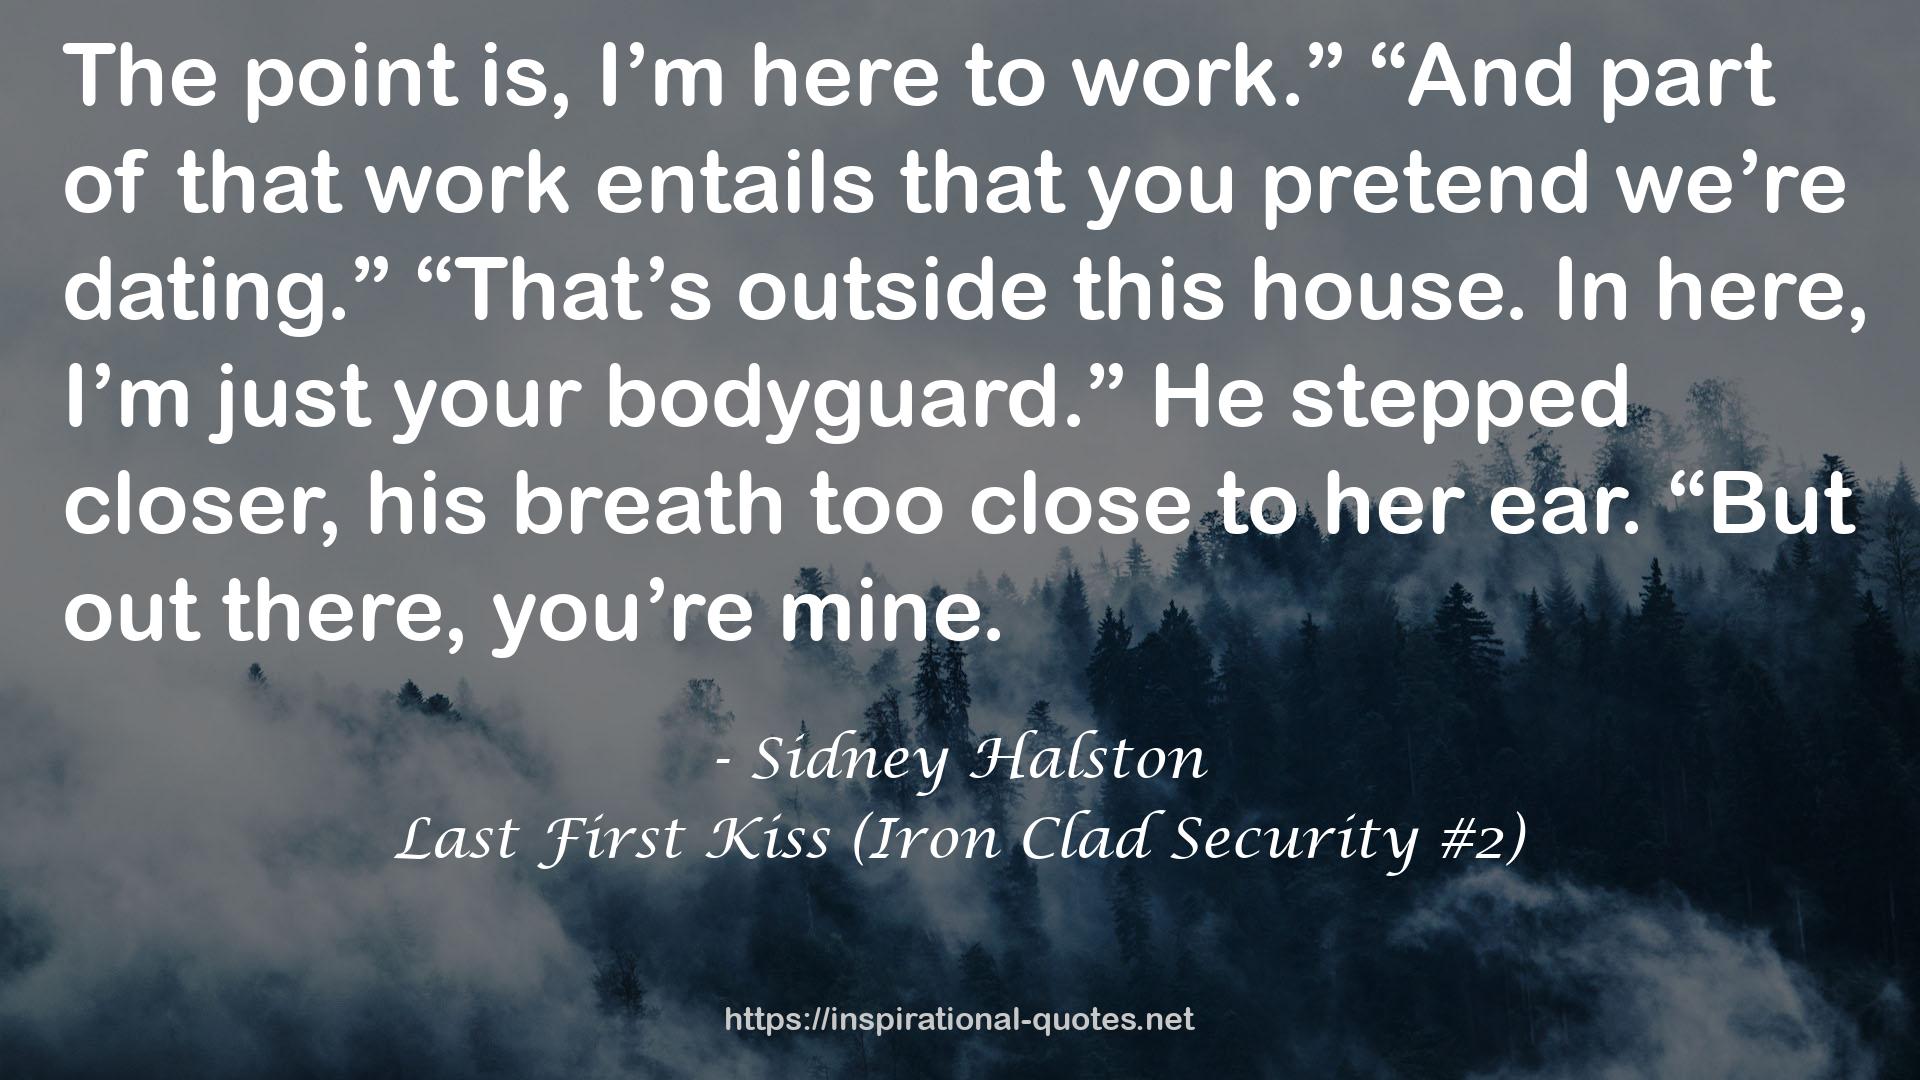 Last First Kiss (Iron Clad Security #2) QUOTES